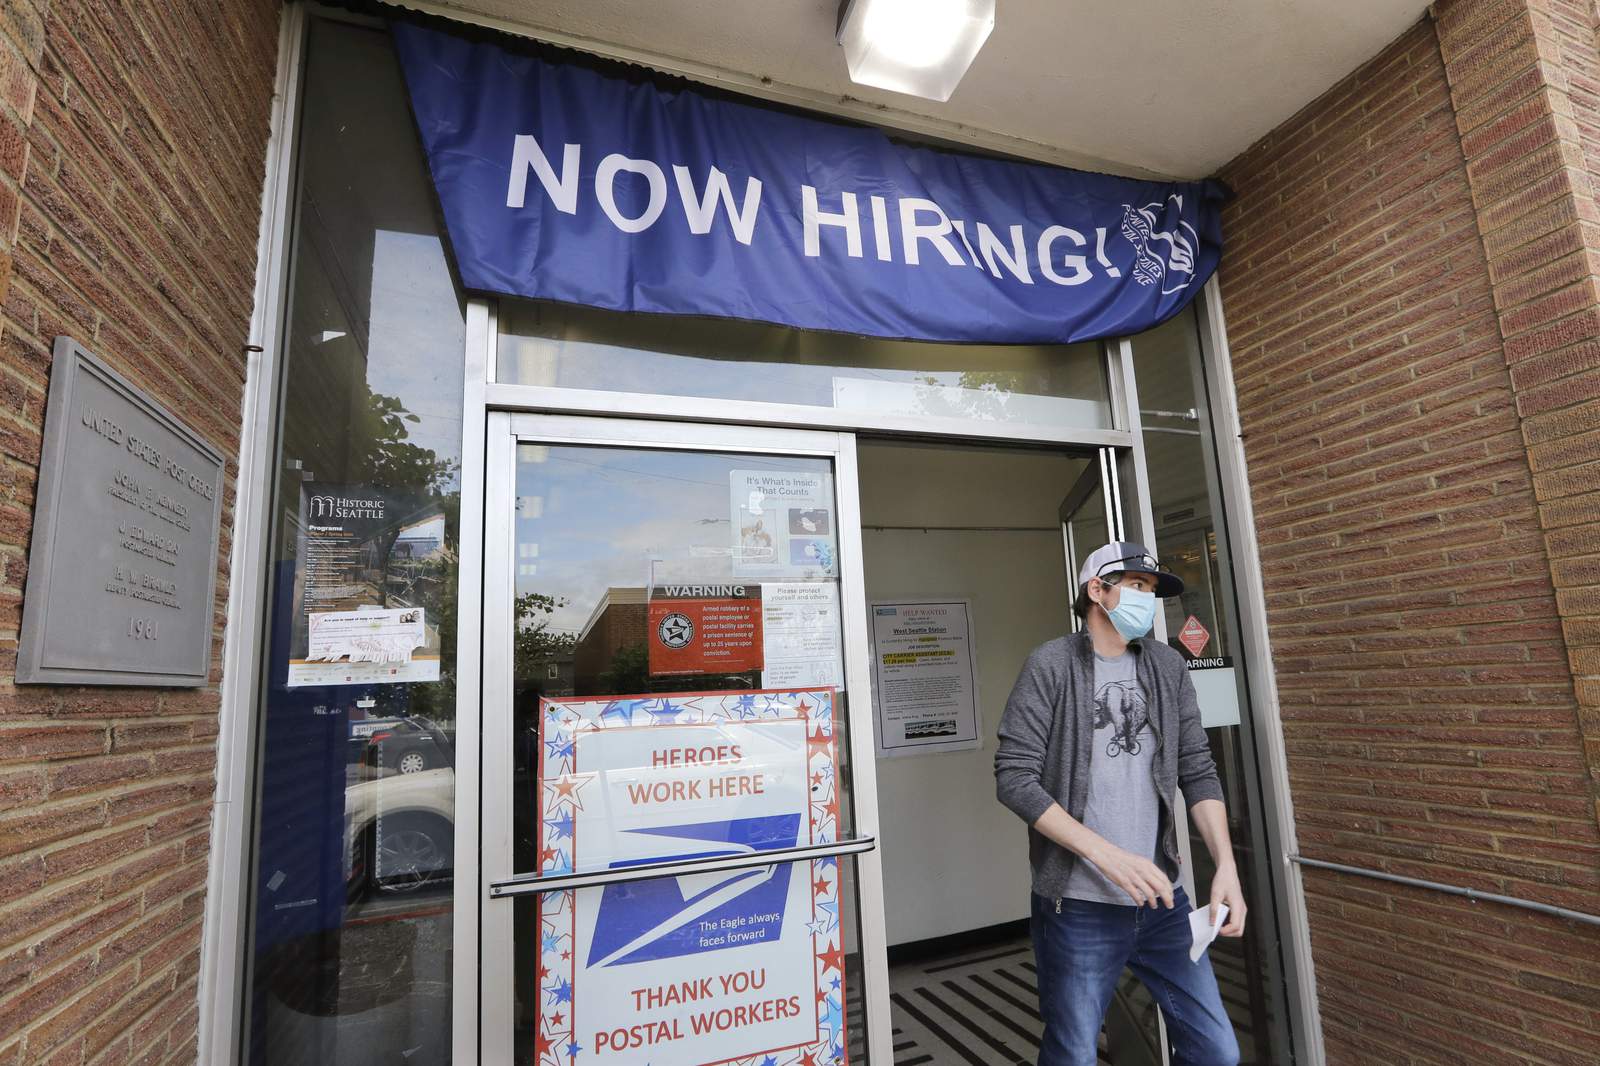 Demand for jobless aid high, even as economy slowly picks up